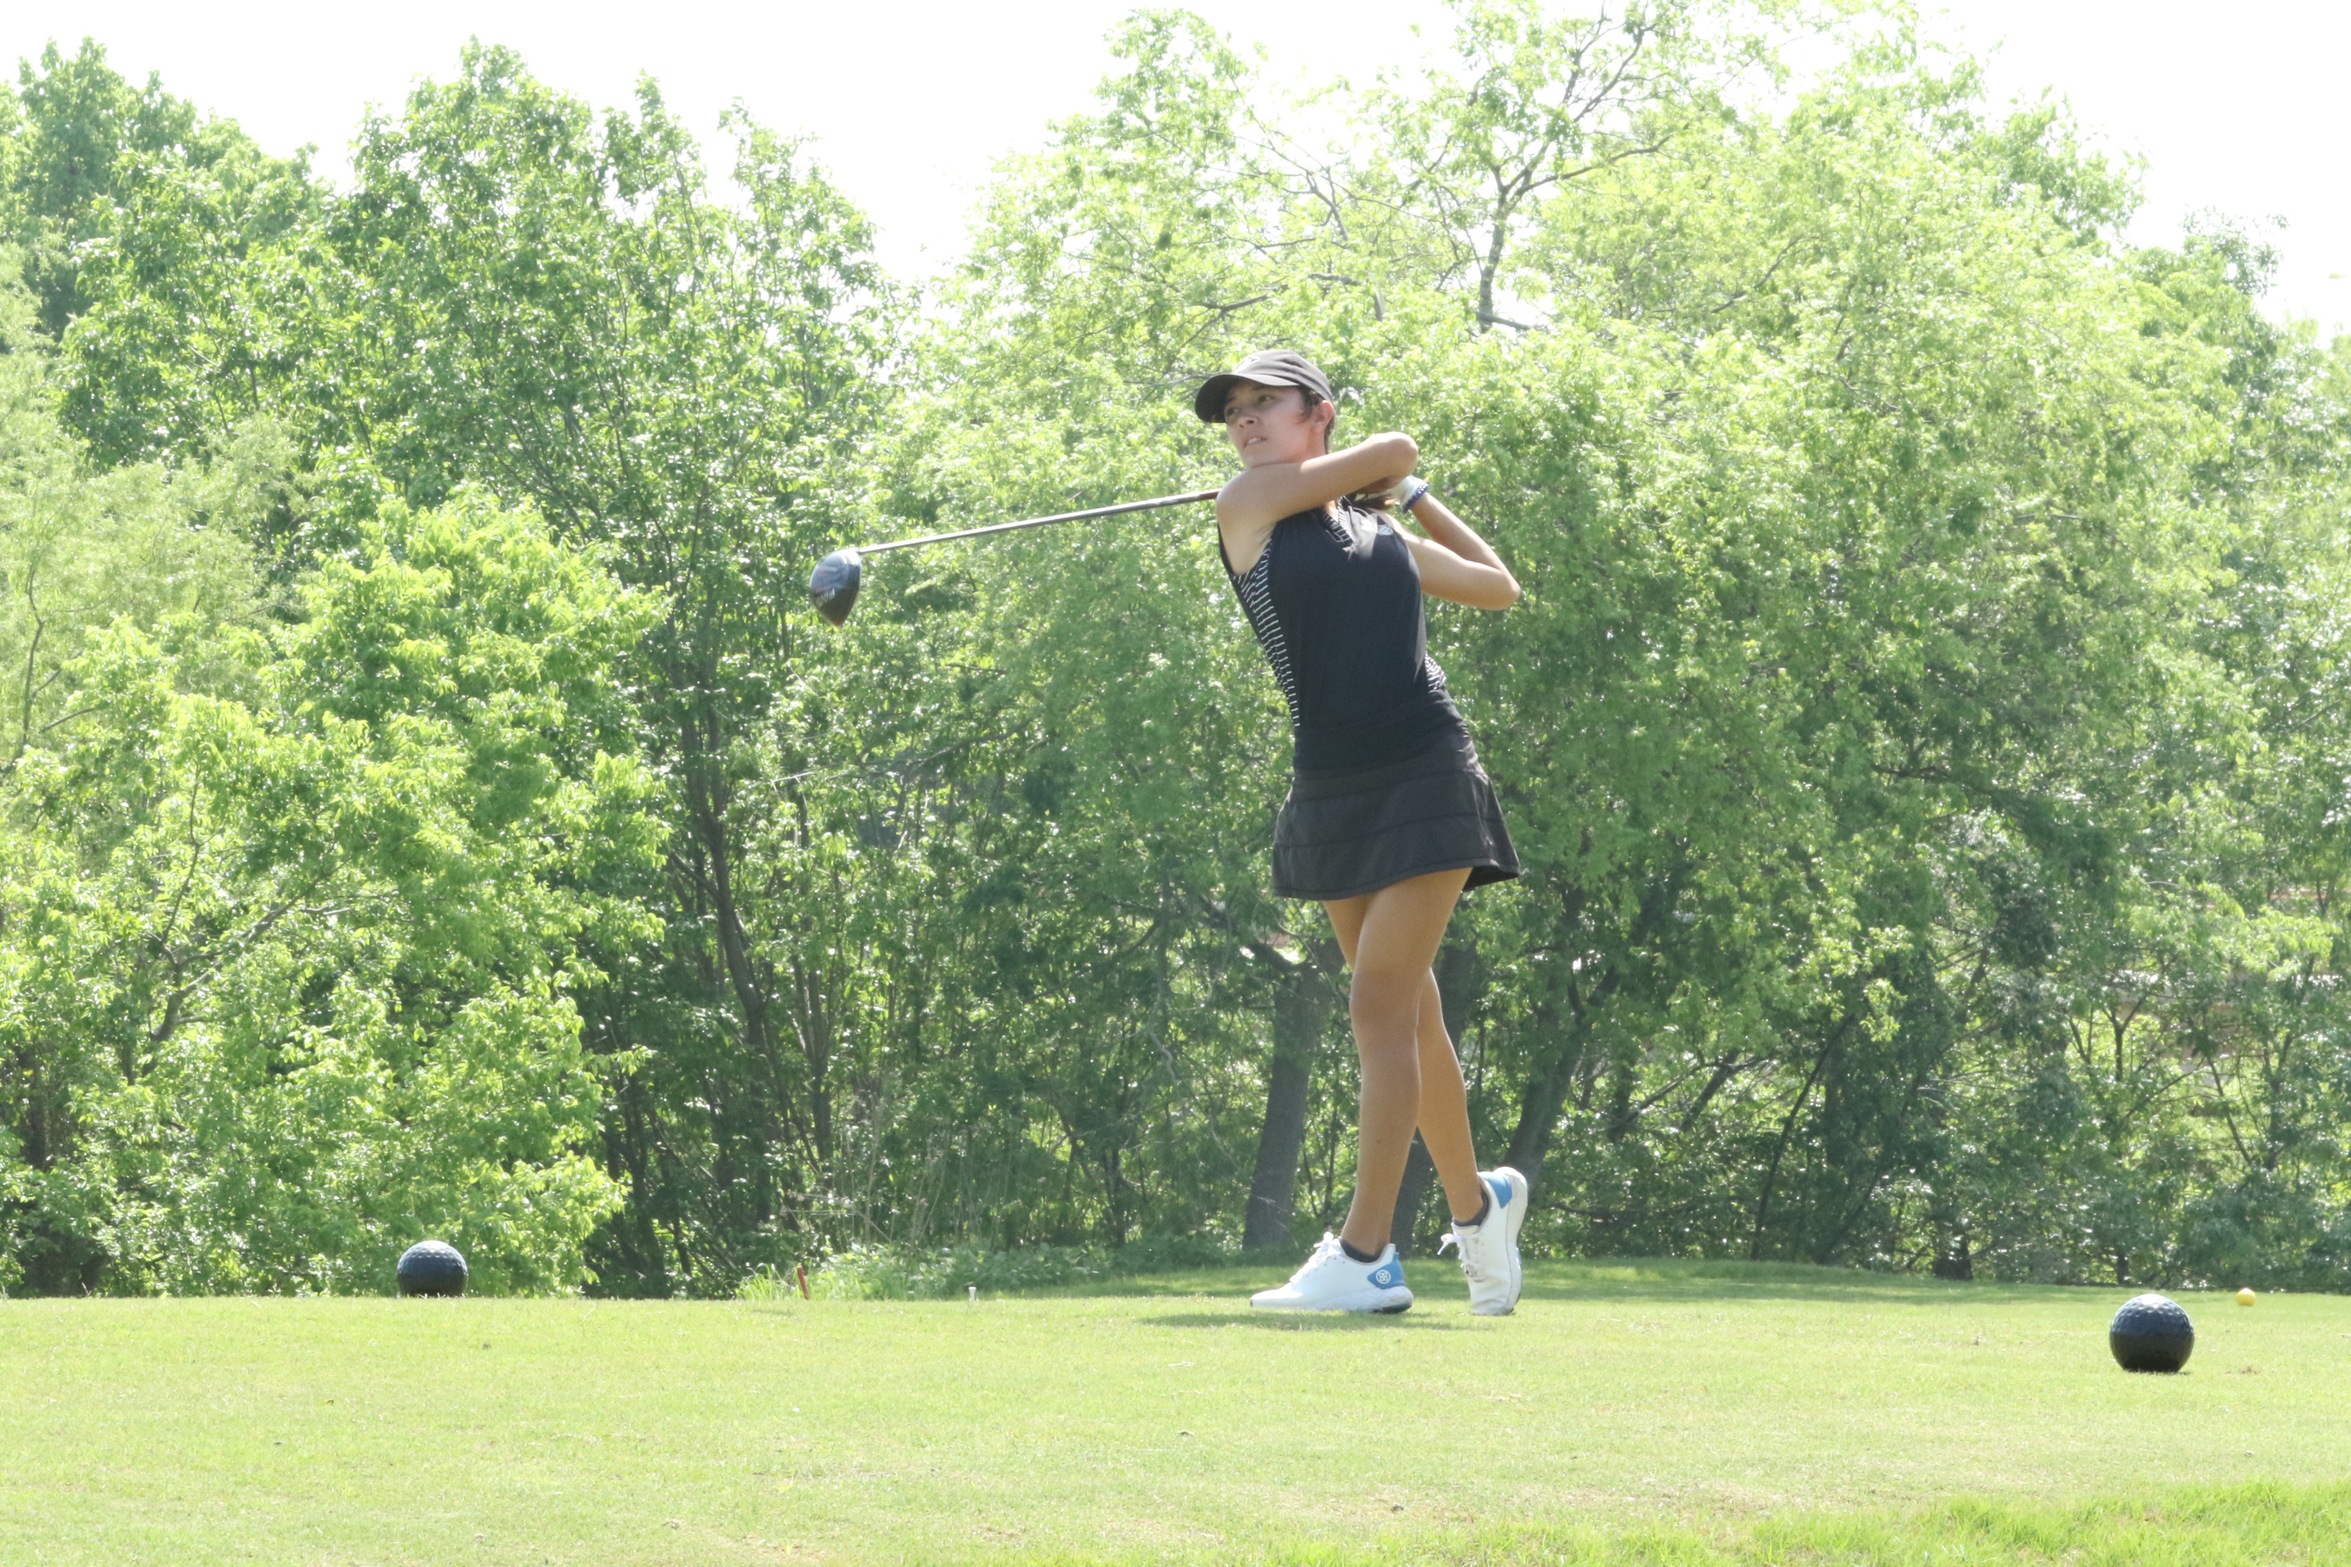 Women's Golf Ties for Second at Lady Bulldog Invitational - Panter Ties for Third